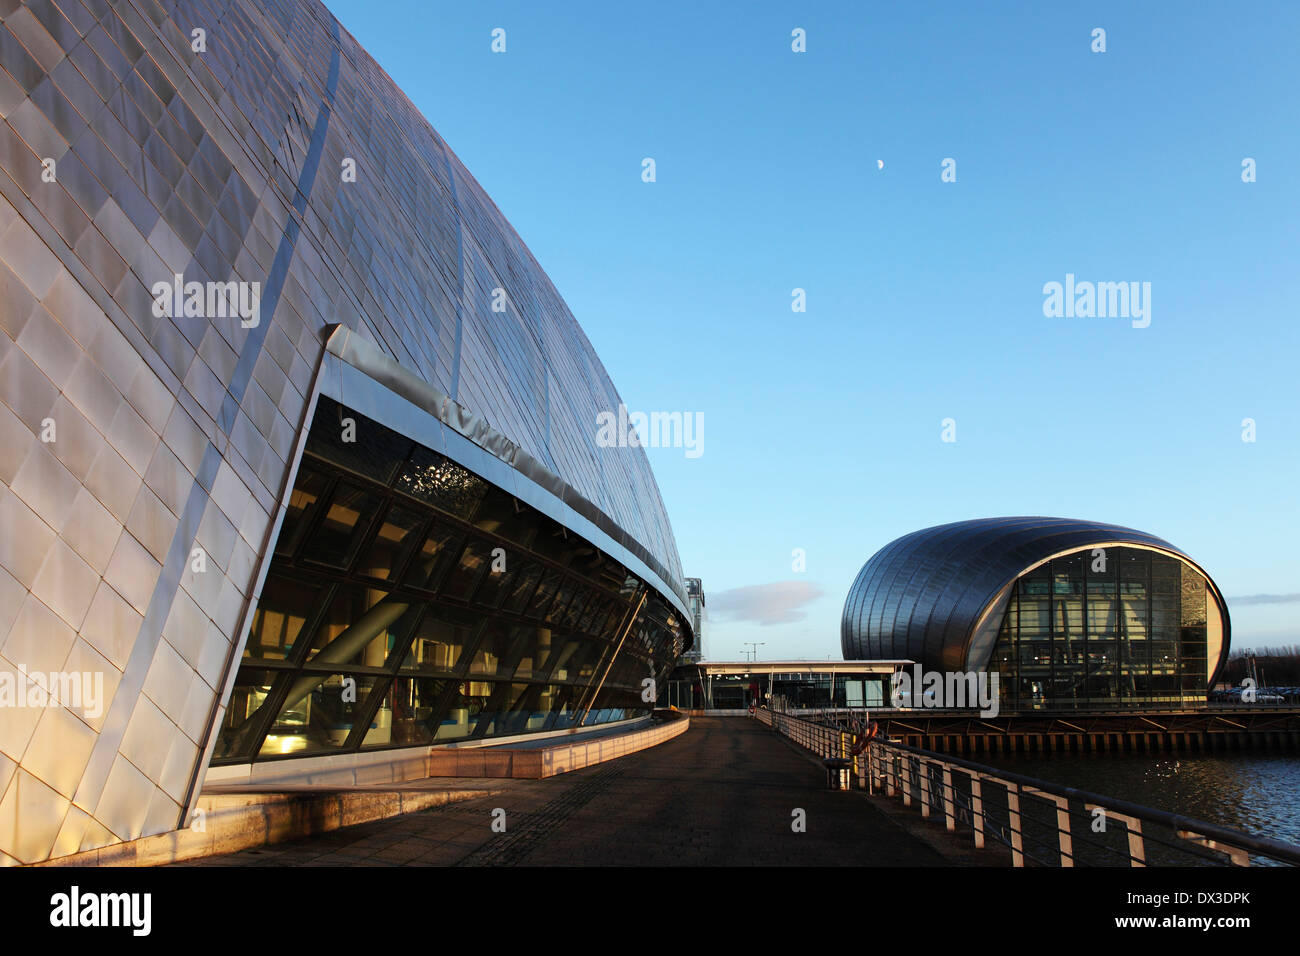 The metallic facade of the Imax Cinema in Glasgow, Scotland. It stands in by the Glasgow Science Centre. Stock Photo